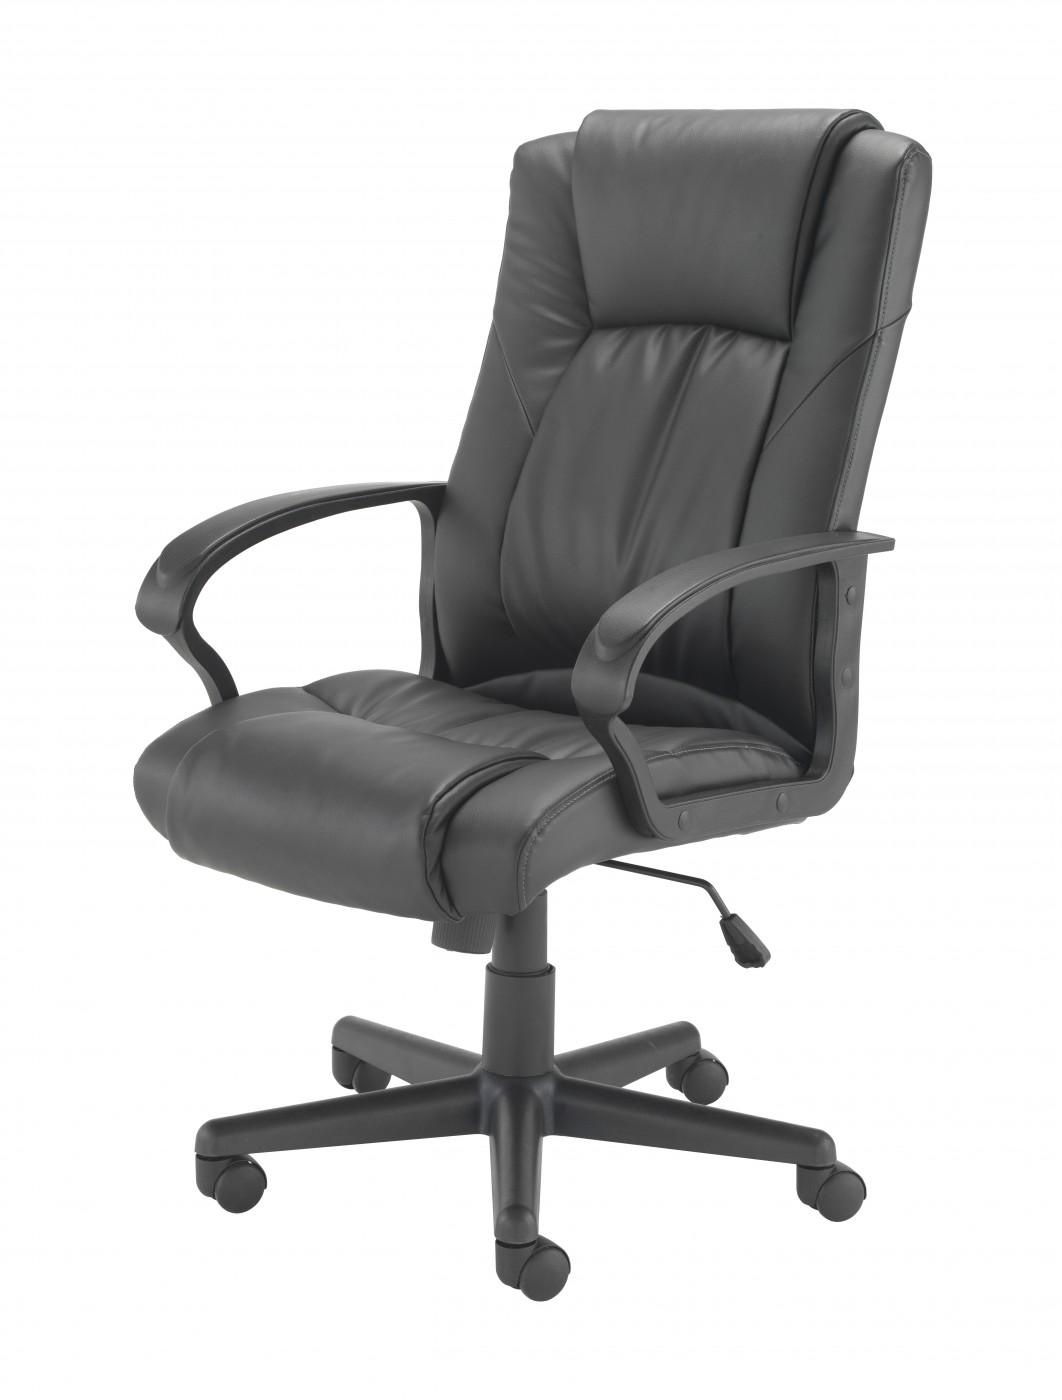 Casino 2 Executive visitor  chair Black leather finish